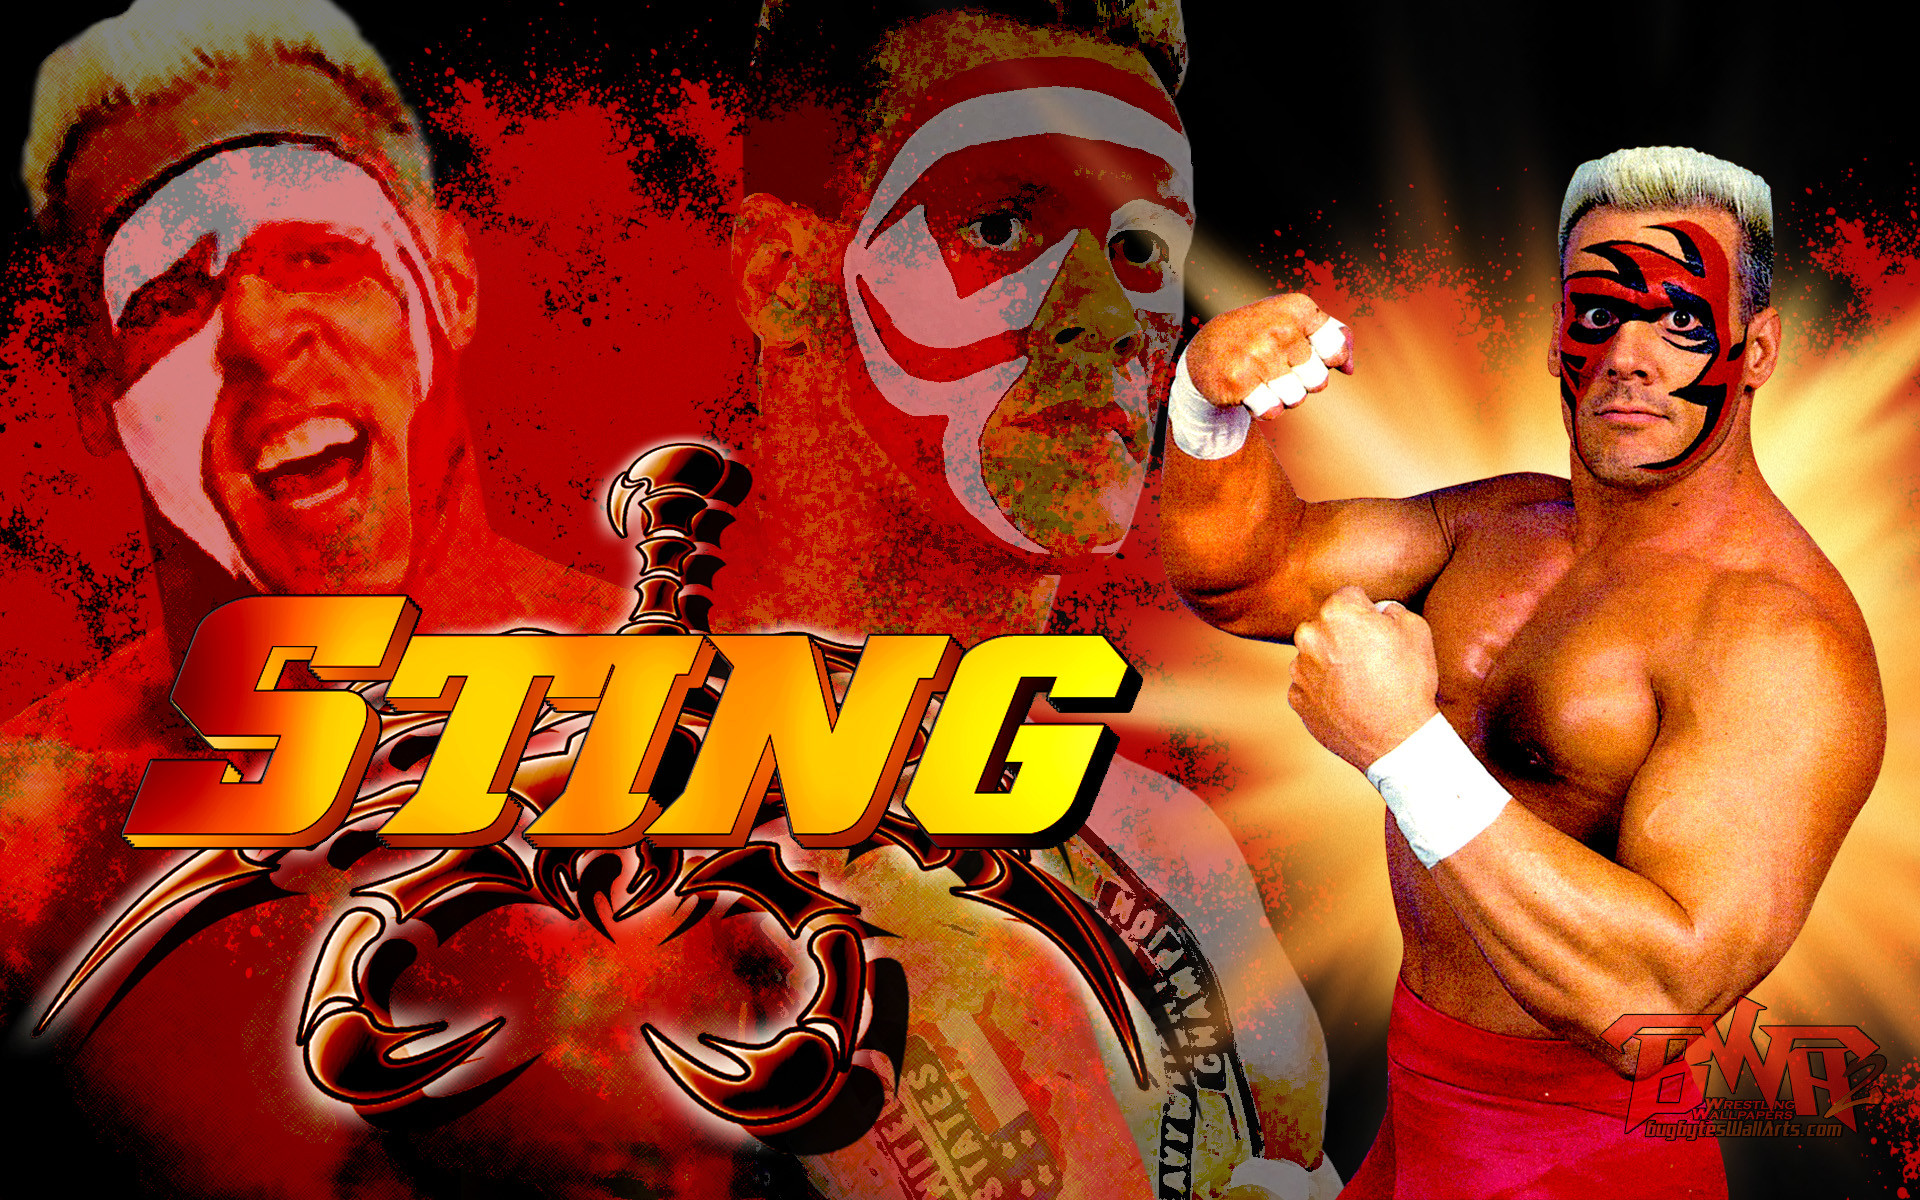 1920x1200 The multi colored face of sting! #rebuildingmylife